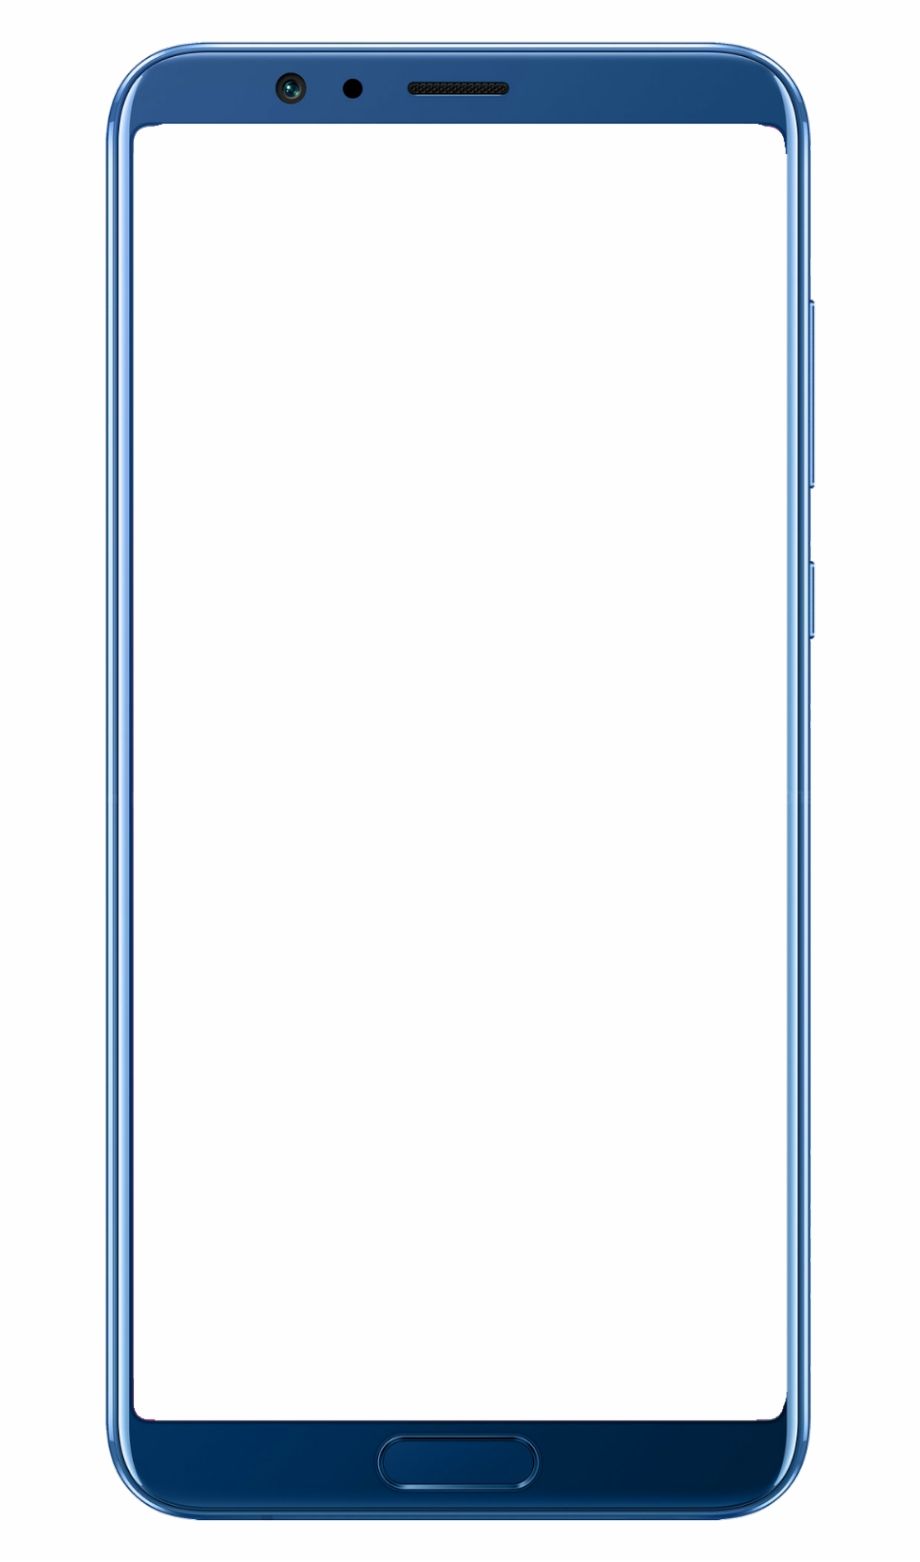 android phone png